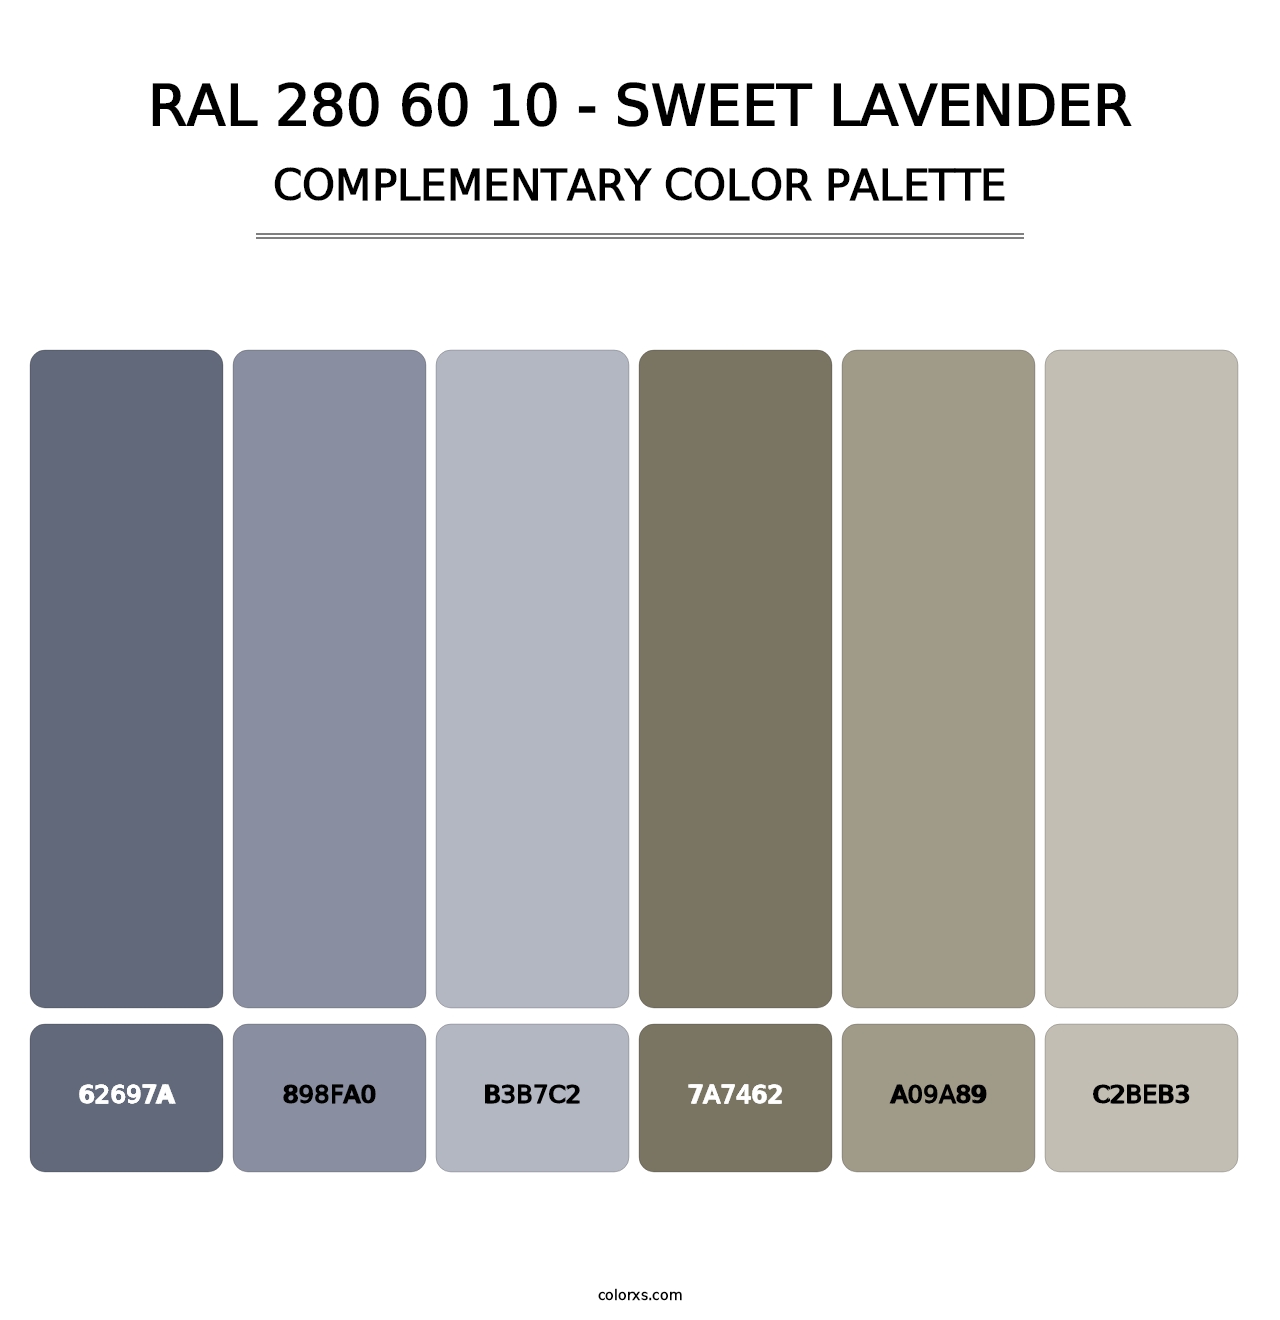 RAL 280 60 10 - Sweet Lavender - Complementary Color Palette